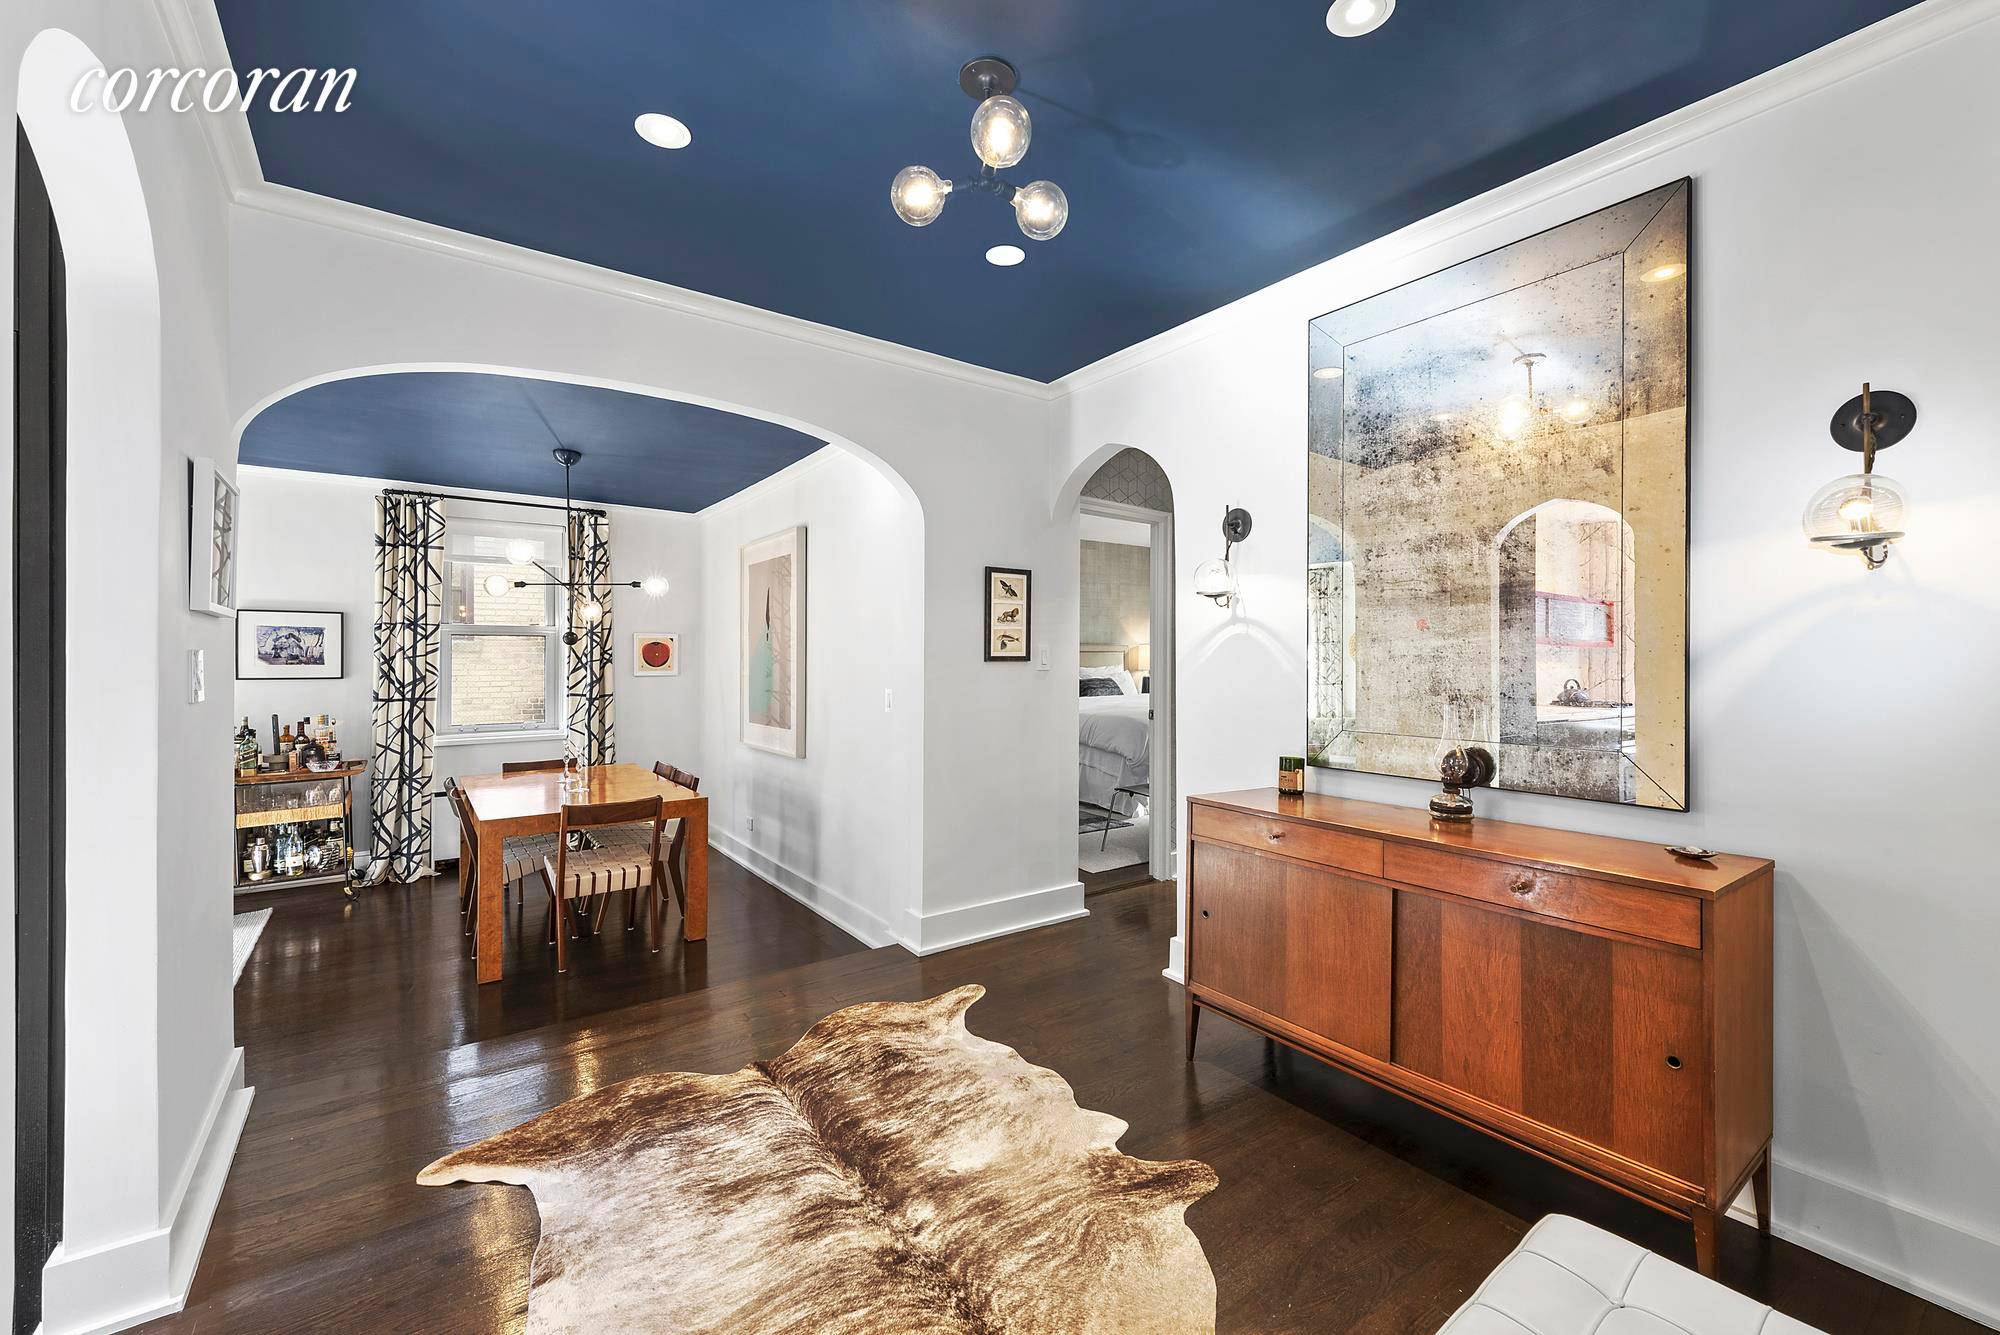 This oversized, gracious 850sqft one bedroom on scenic Bank Street in Abingdon CourtA s coveted A line combines original pre war charm with modern amenities.